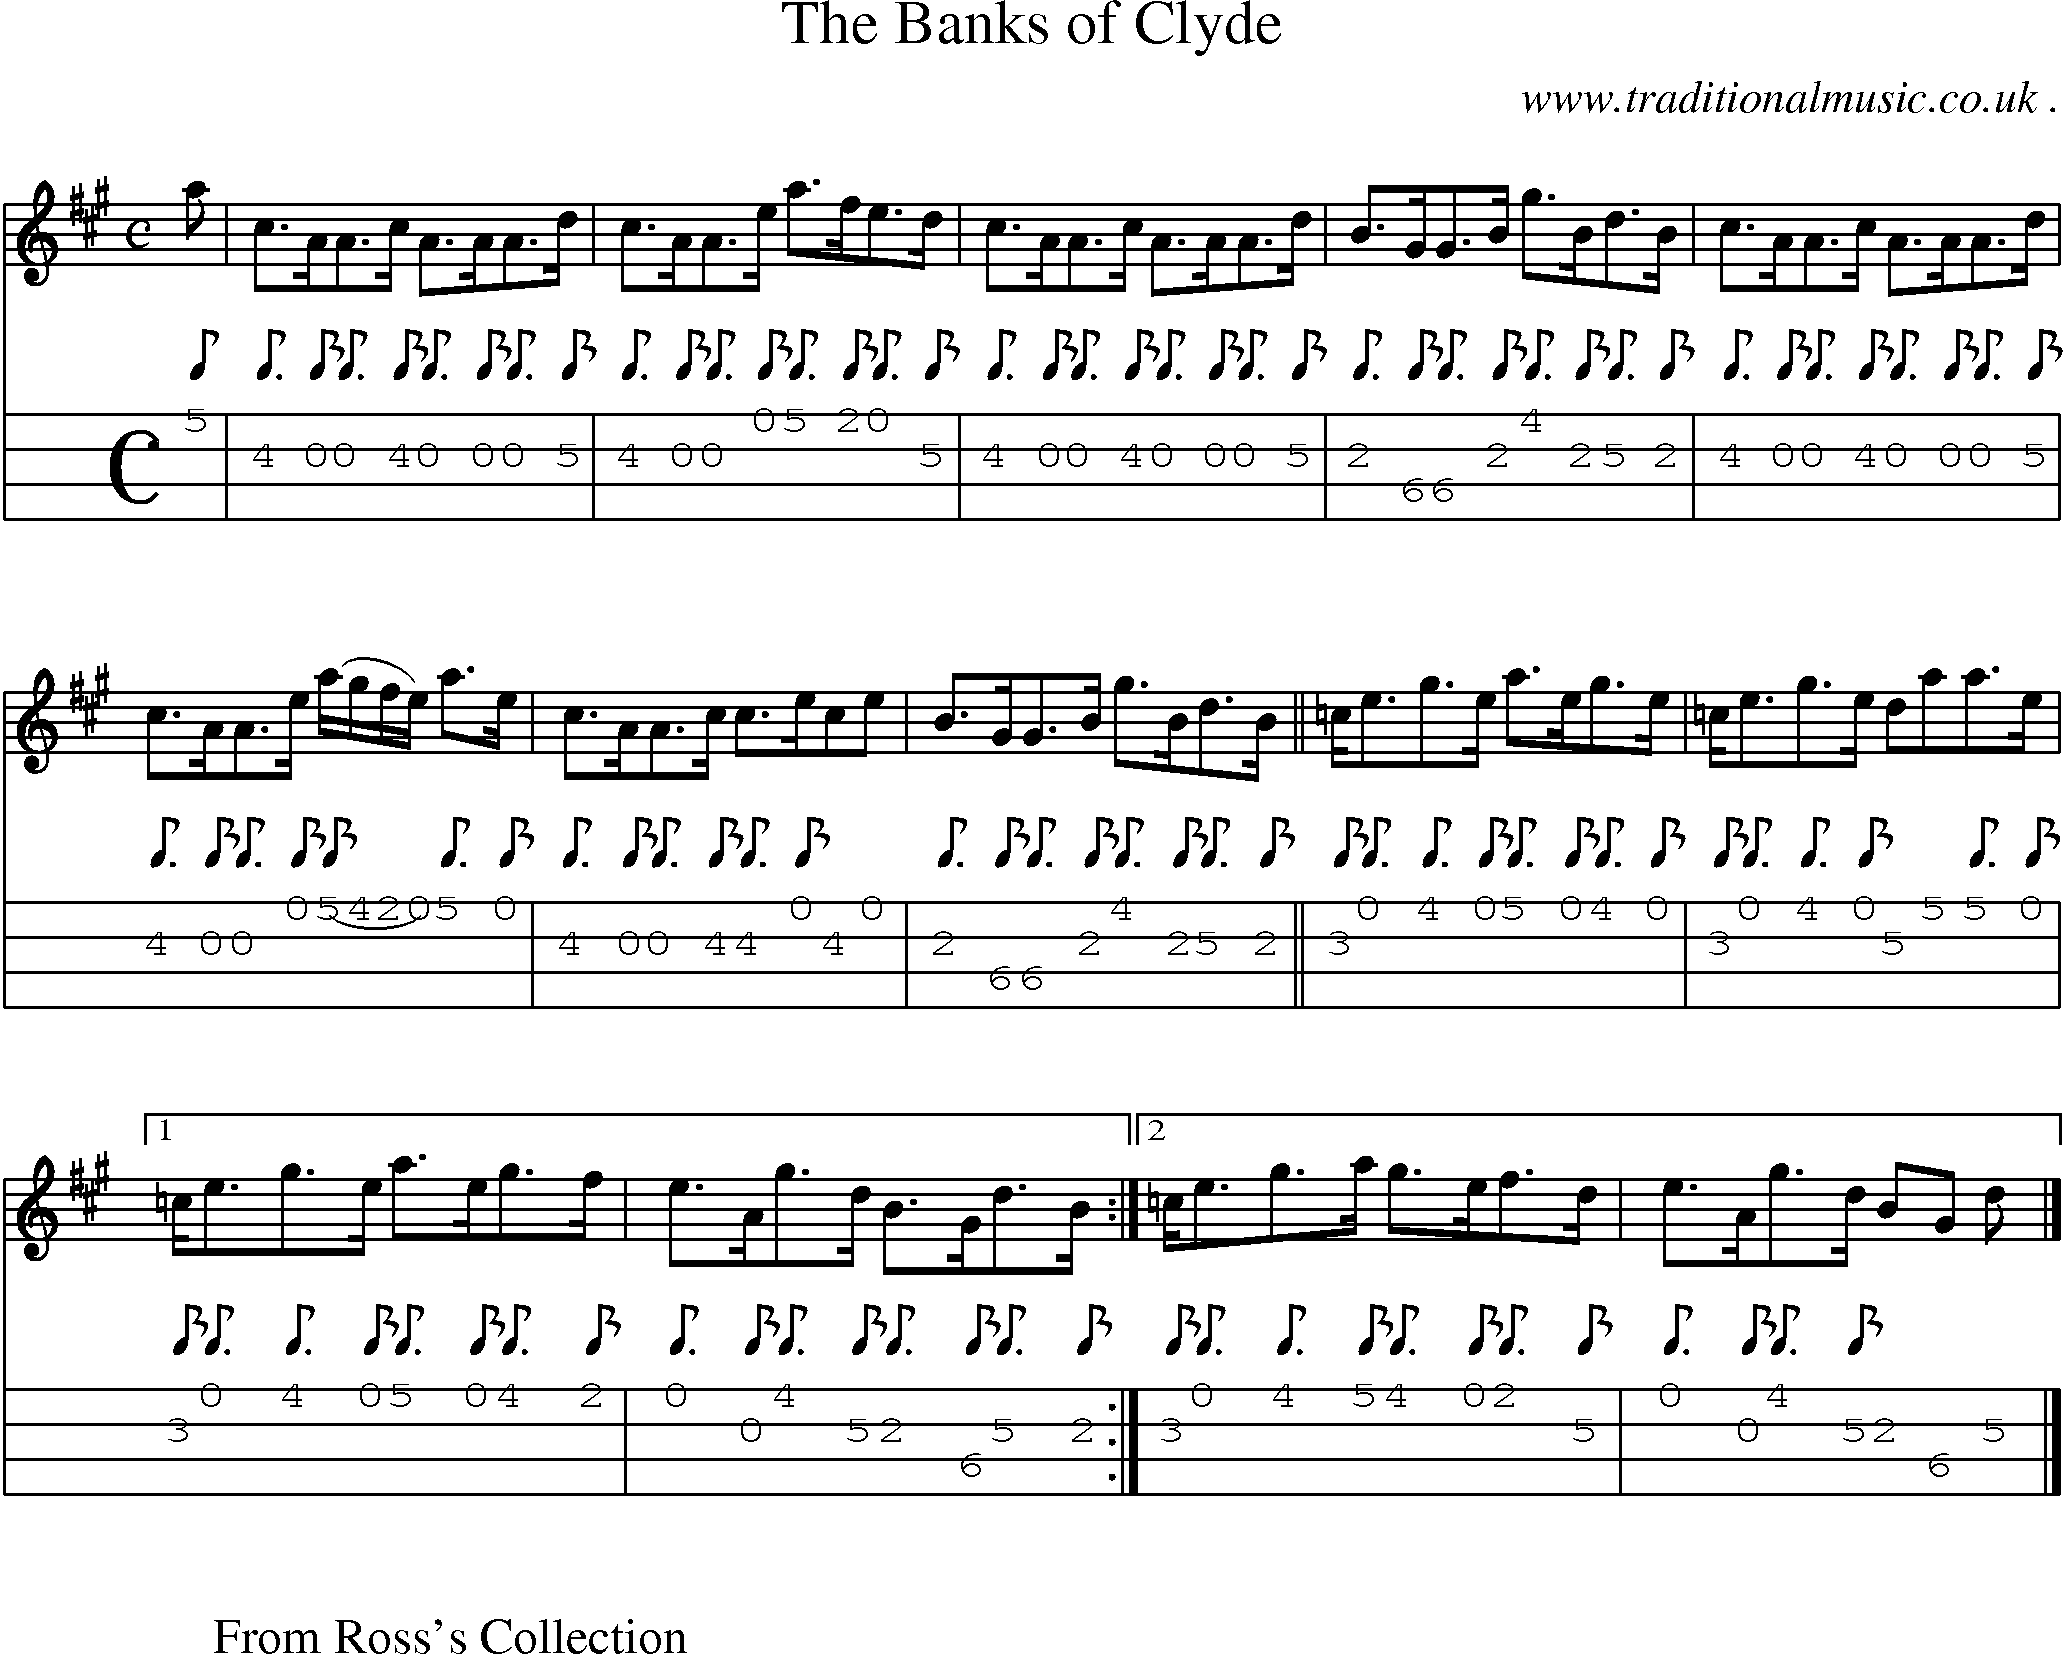 Sheet-music  score, Chords and Mandolin Tabs for The Banks Of Clyde